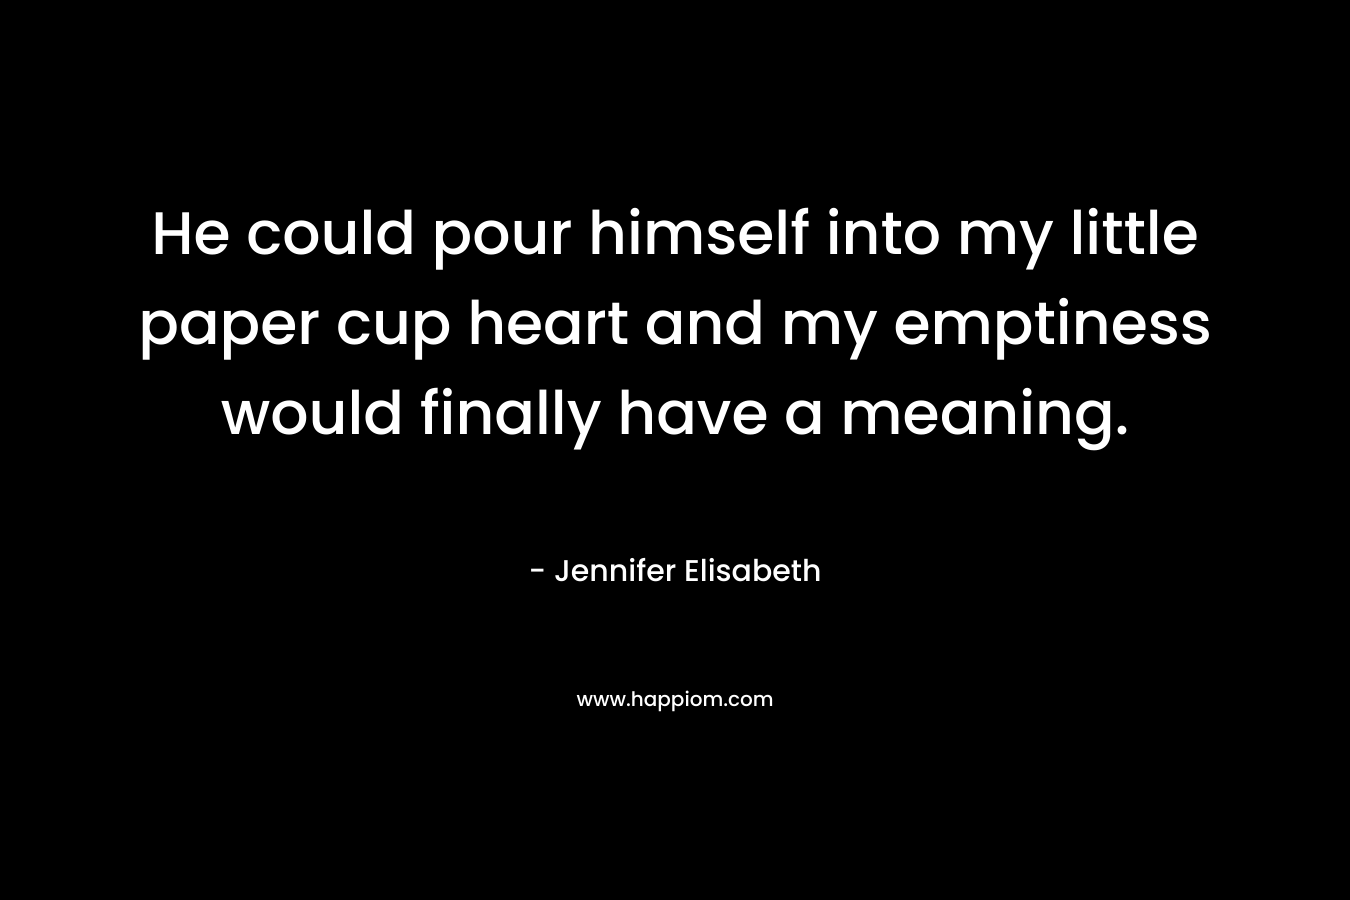 He could pour himself into my little paper cup heart and my emptiness would finally have a meaning. – Jennifer Elisabeth